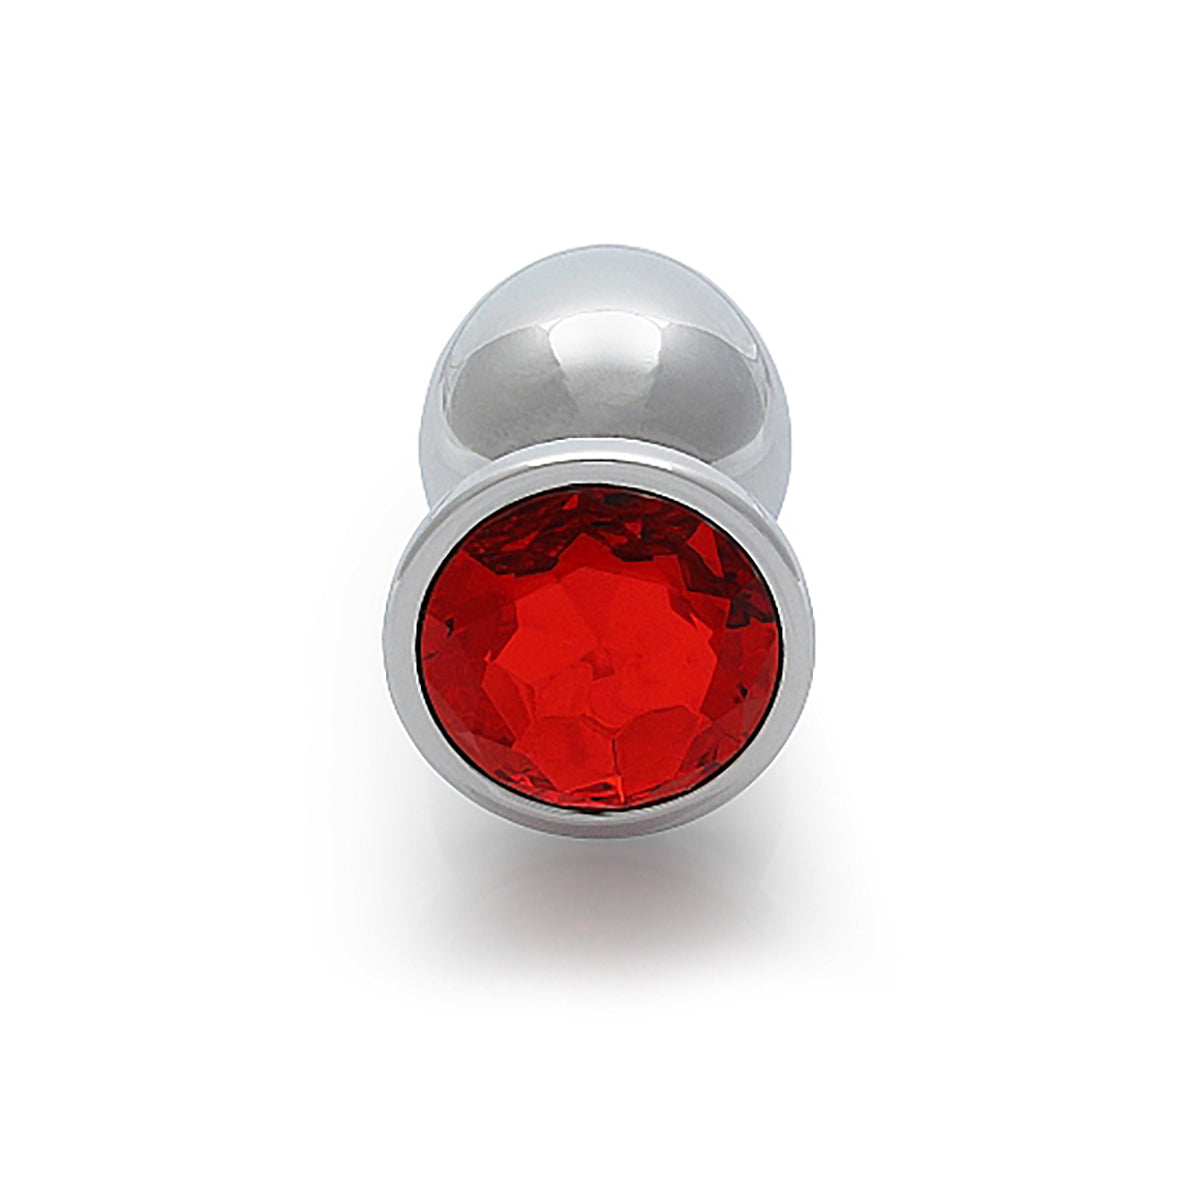 Shots Ouch! Round Gem Butt Plug Large Silver/Ruby Red - Zateo Joy